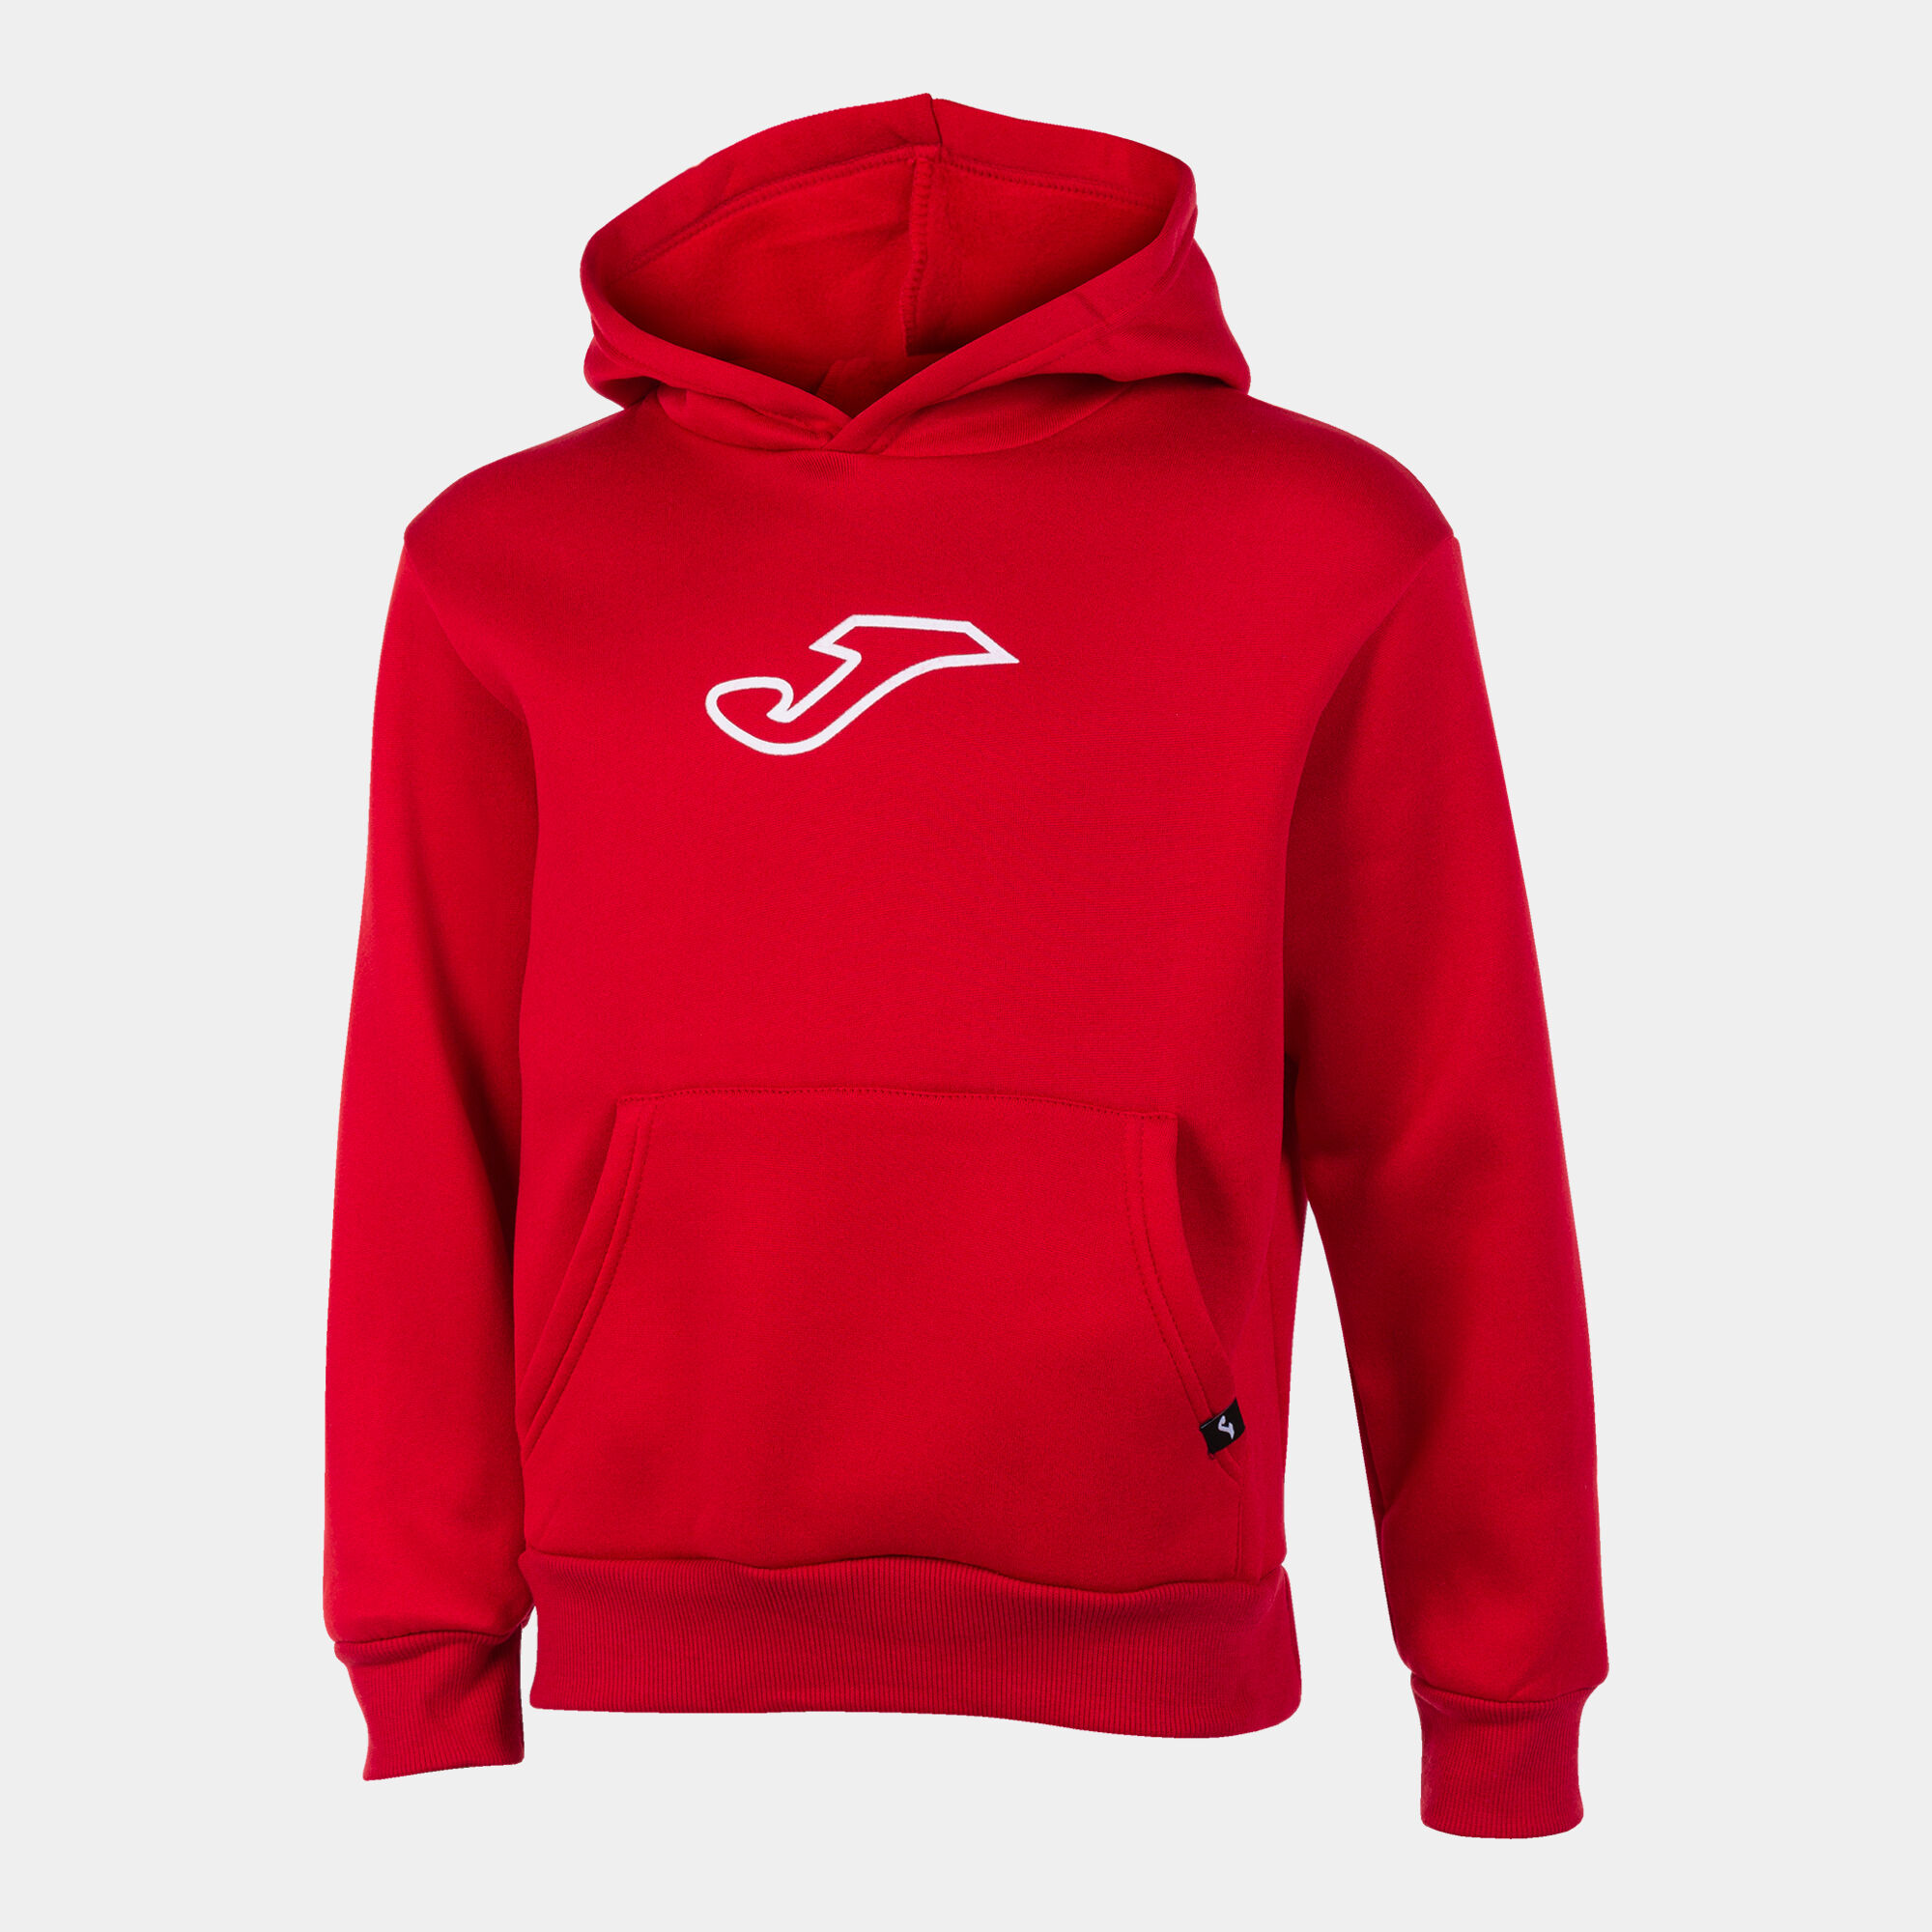 HOODED SWEATER JUNIOR GAMMA RED